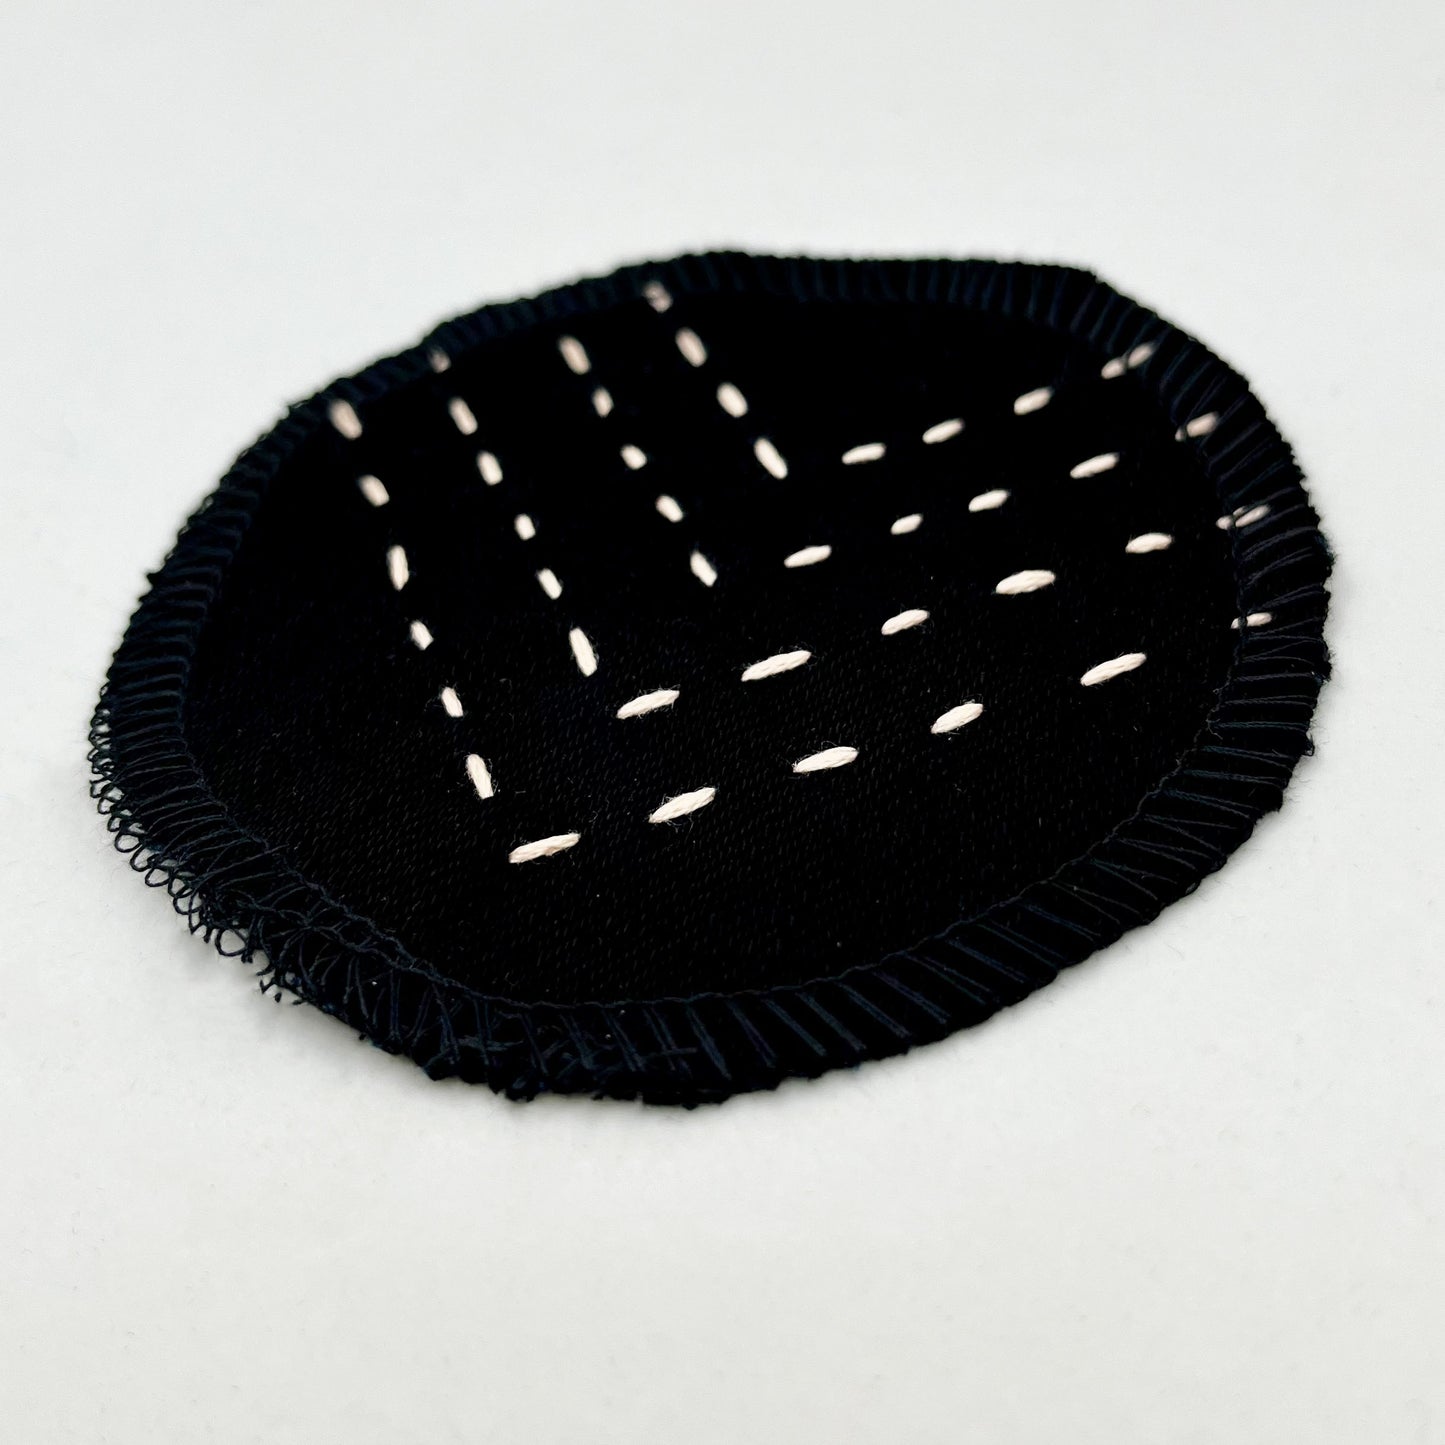 close up angled view of a circle shaped patch made out of black denim, with overlocked edges, with rows of peach running stitches in a chevron pattern, on a white background